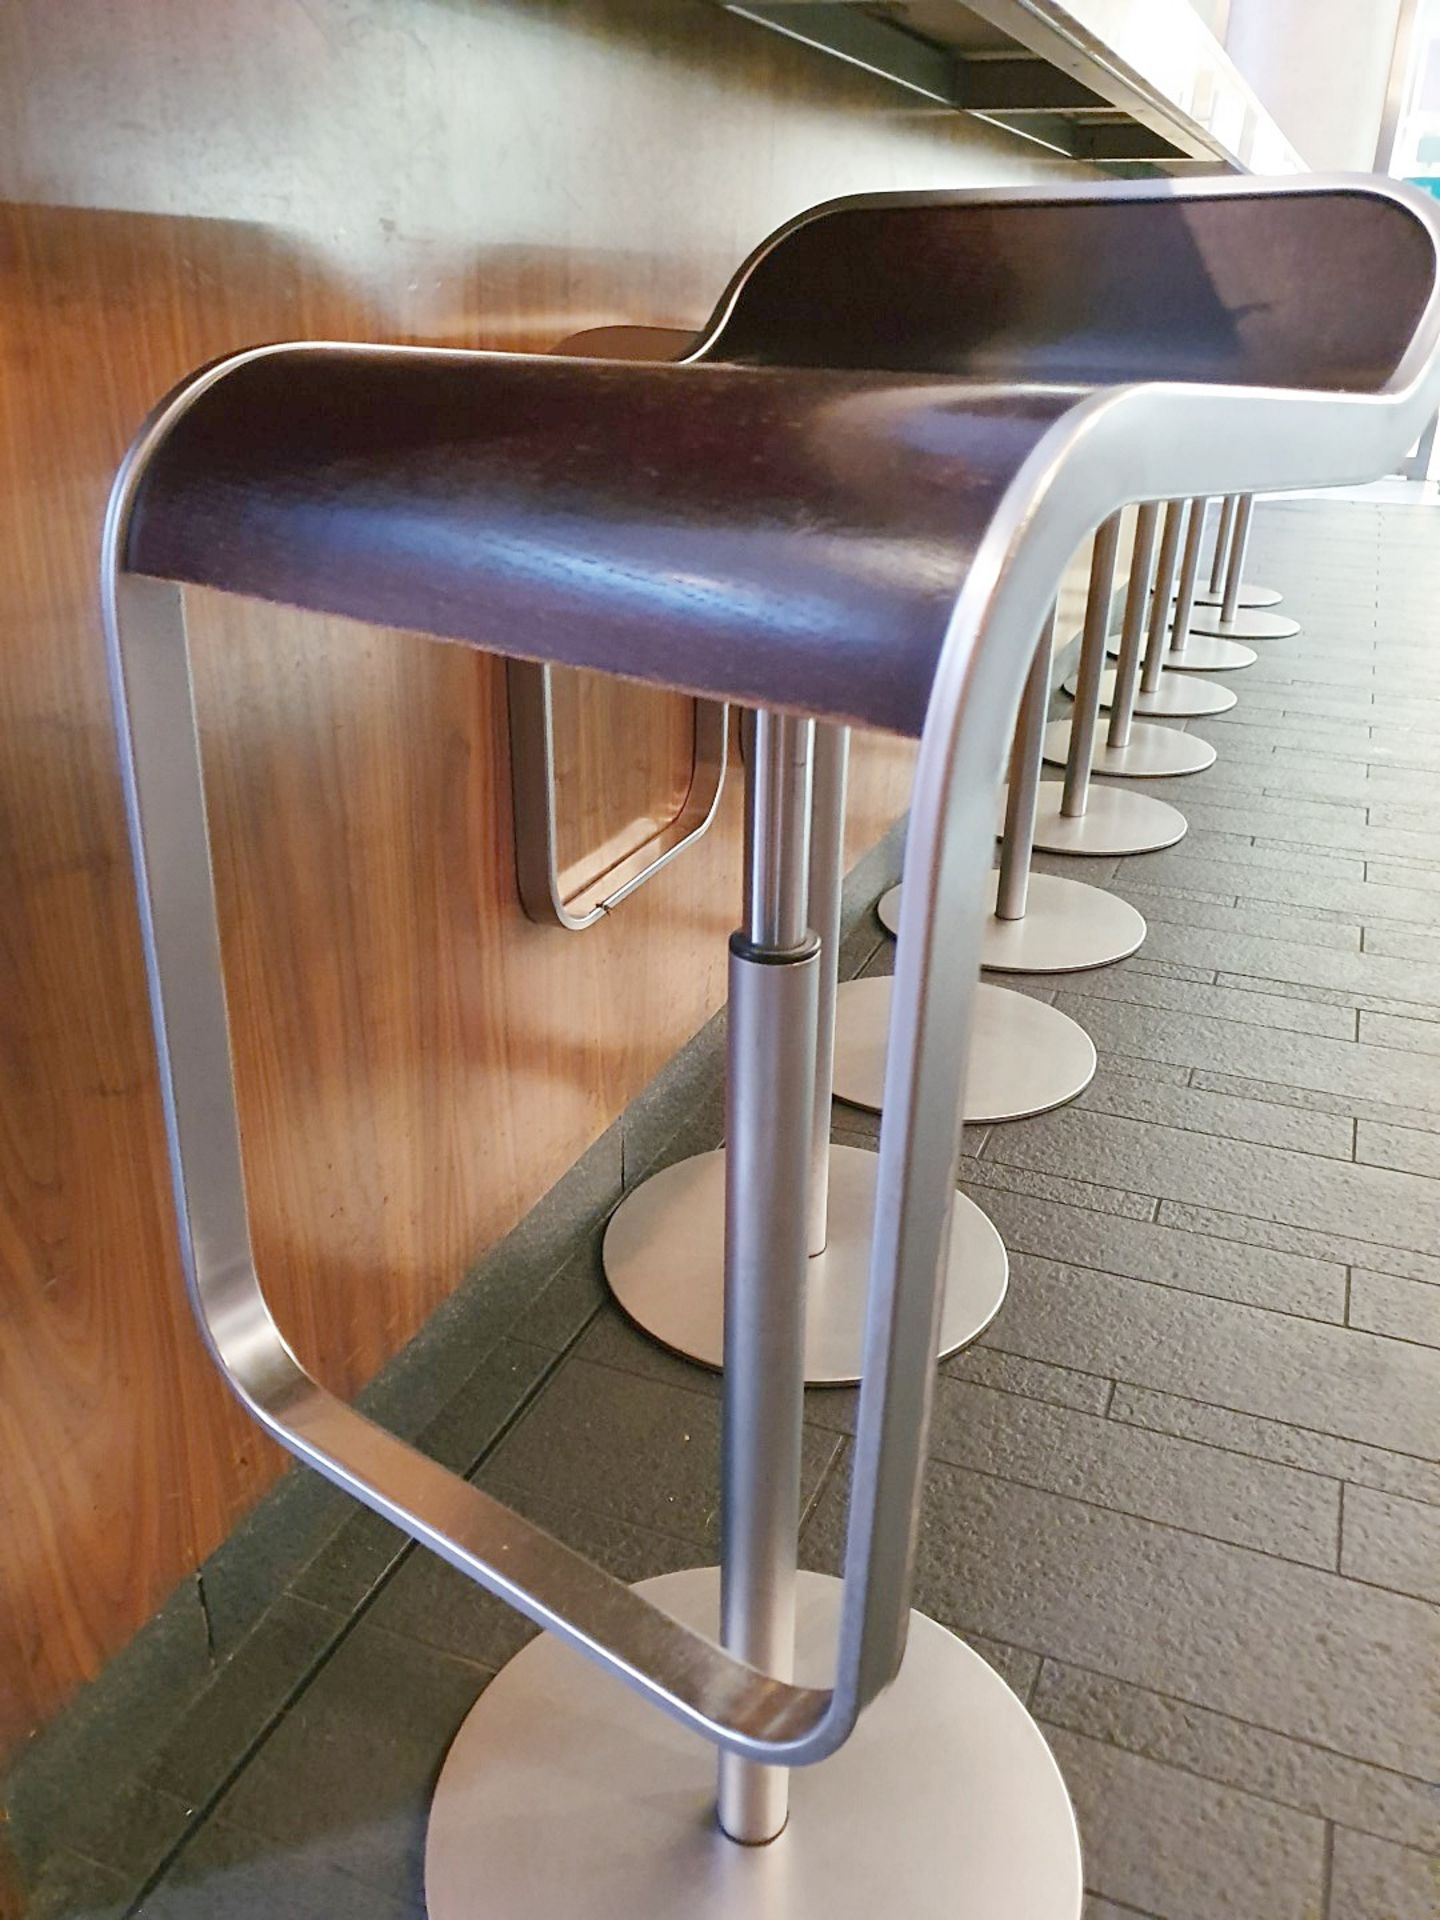 5 x Heavy Duty Commercial Bar Stools With Adjustable Hydraulic Aided Height - Dimensions: 35cm x